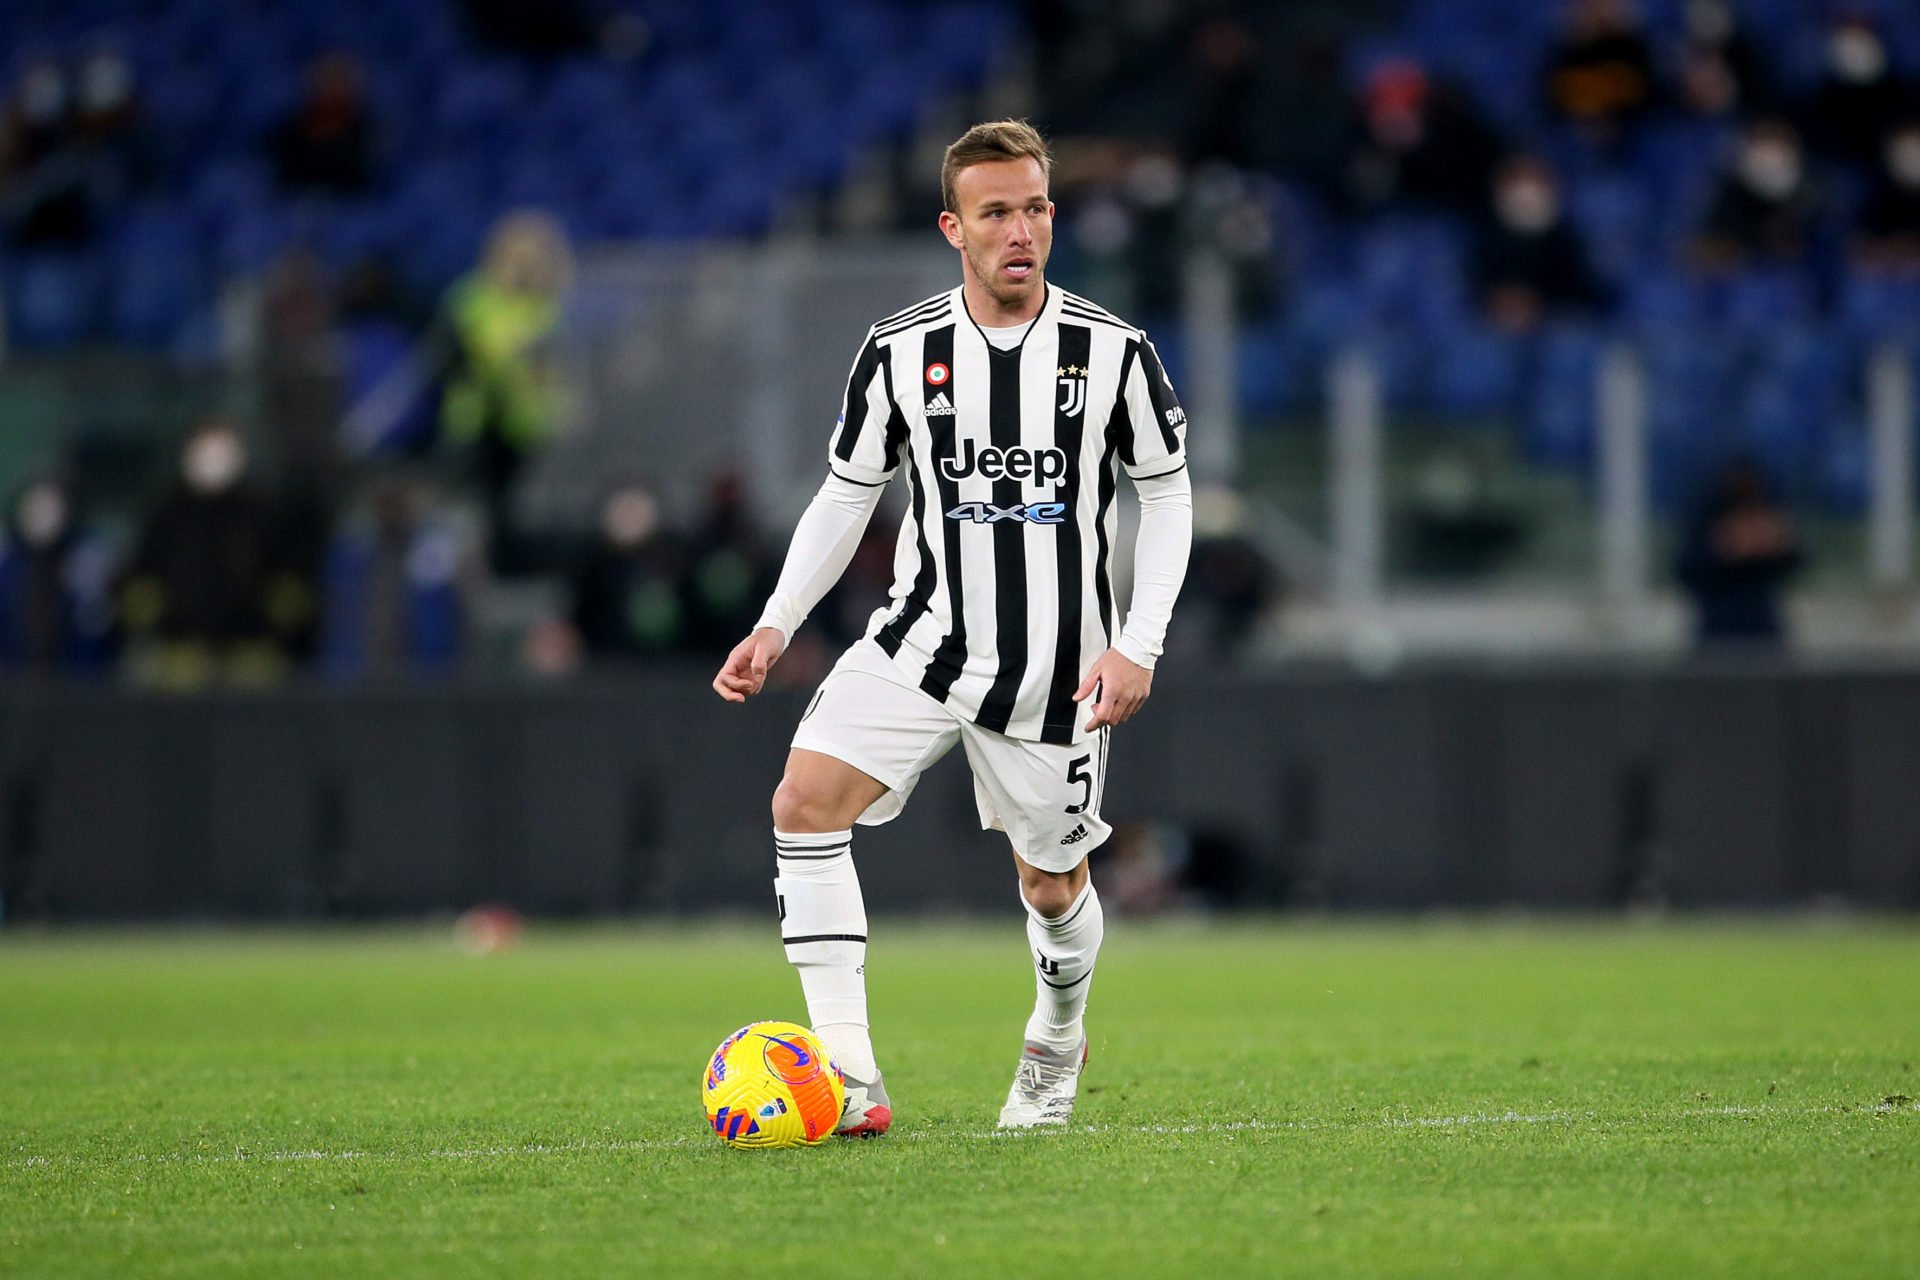 Liverpool set to sign Juventus midfielder Arthur Melo this morning.